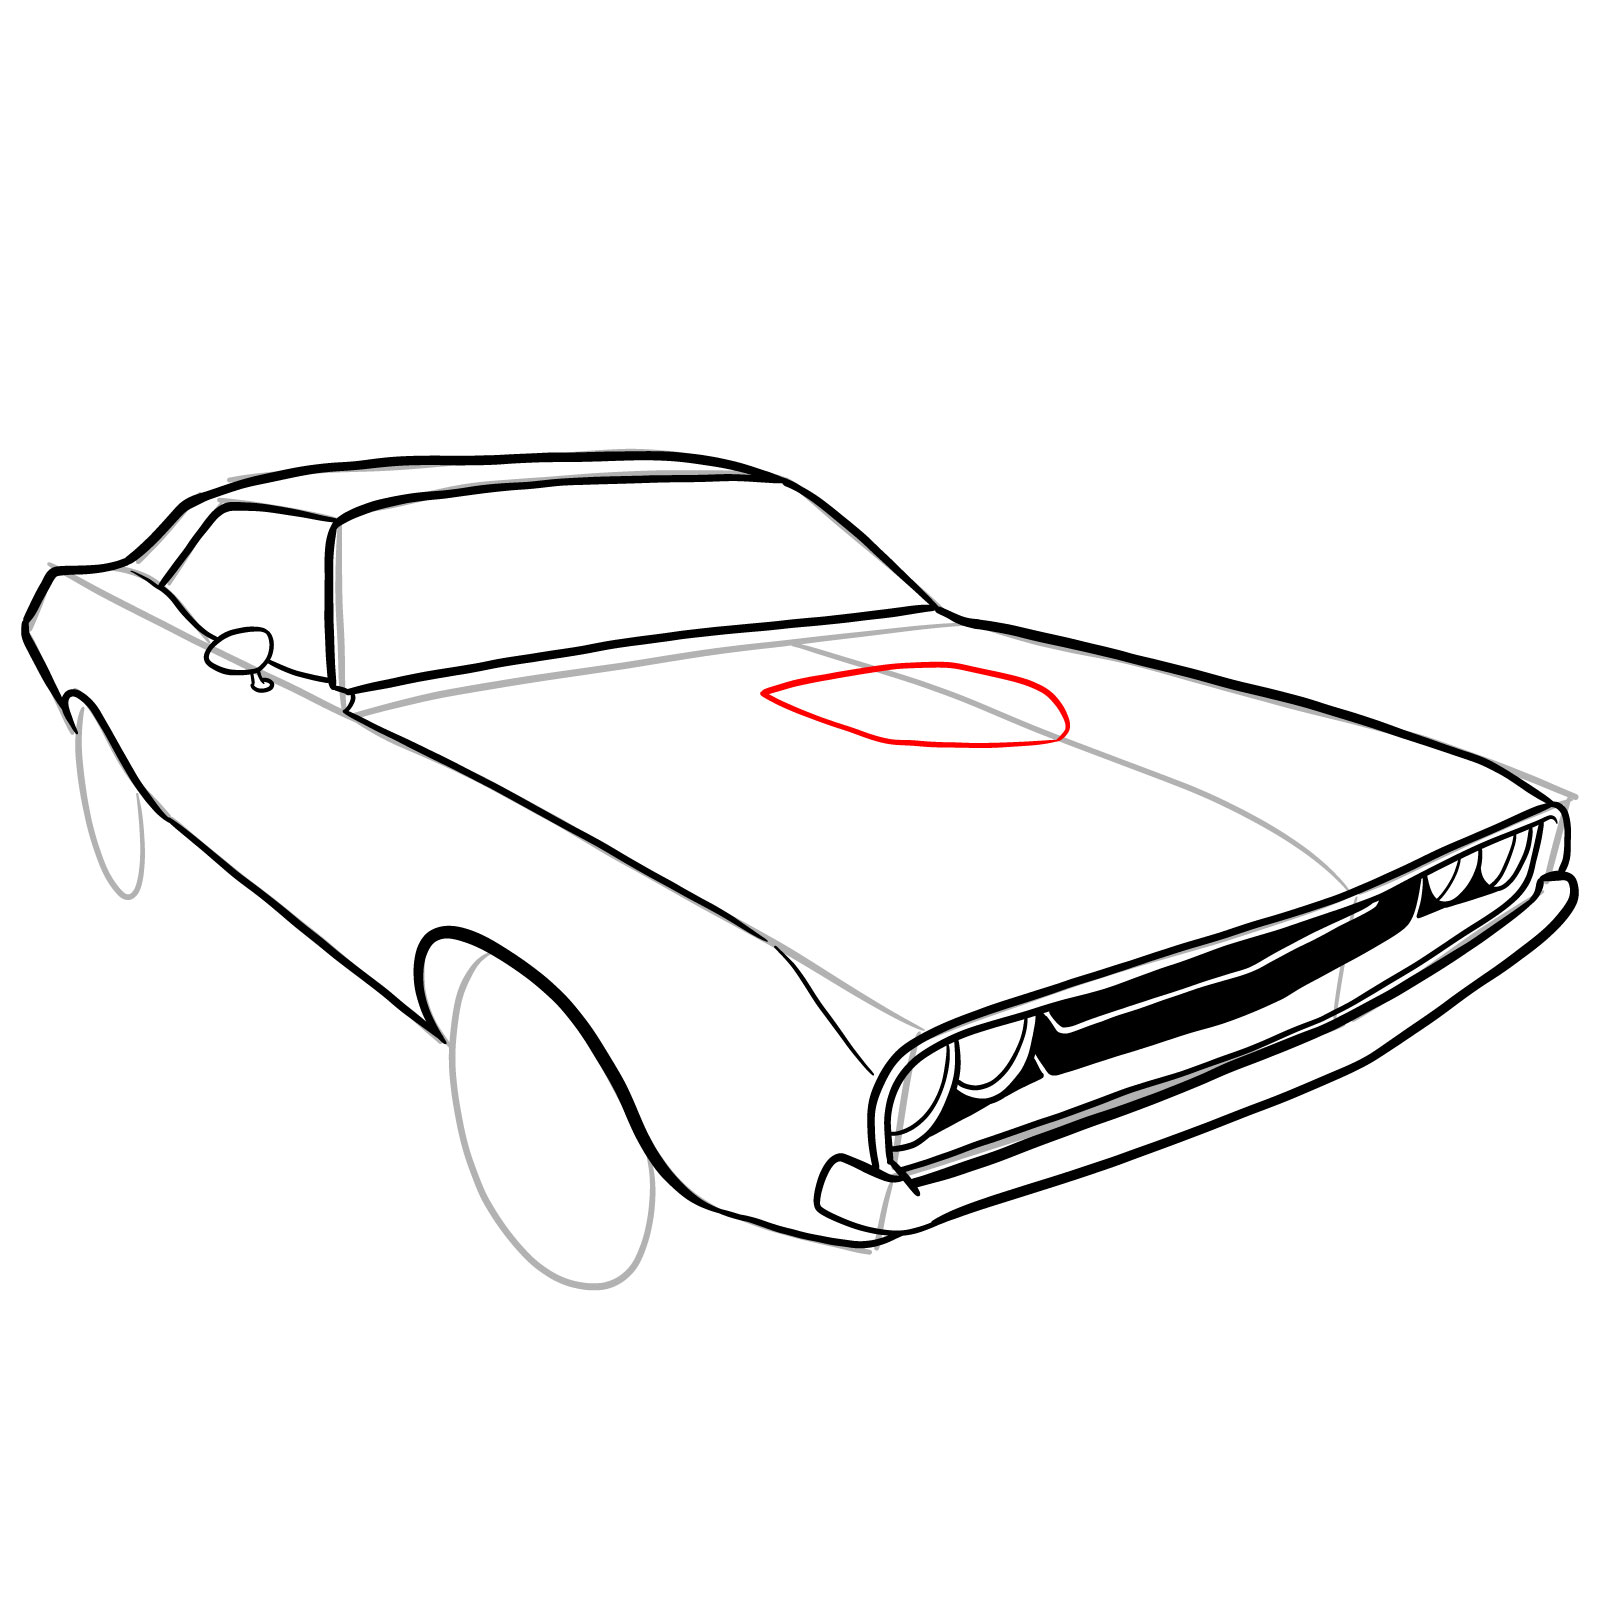 How to draw Dodge Challenger 1970 - step 23